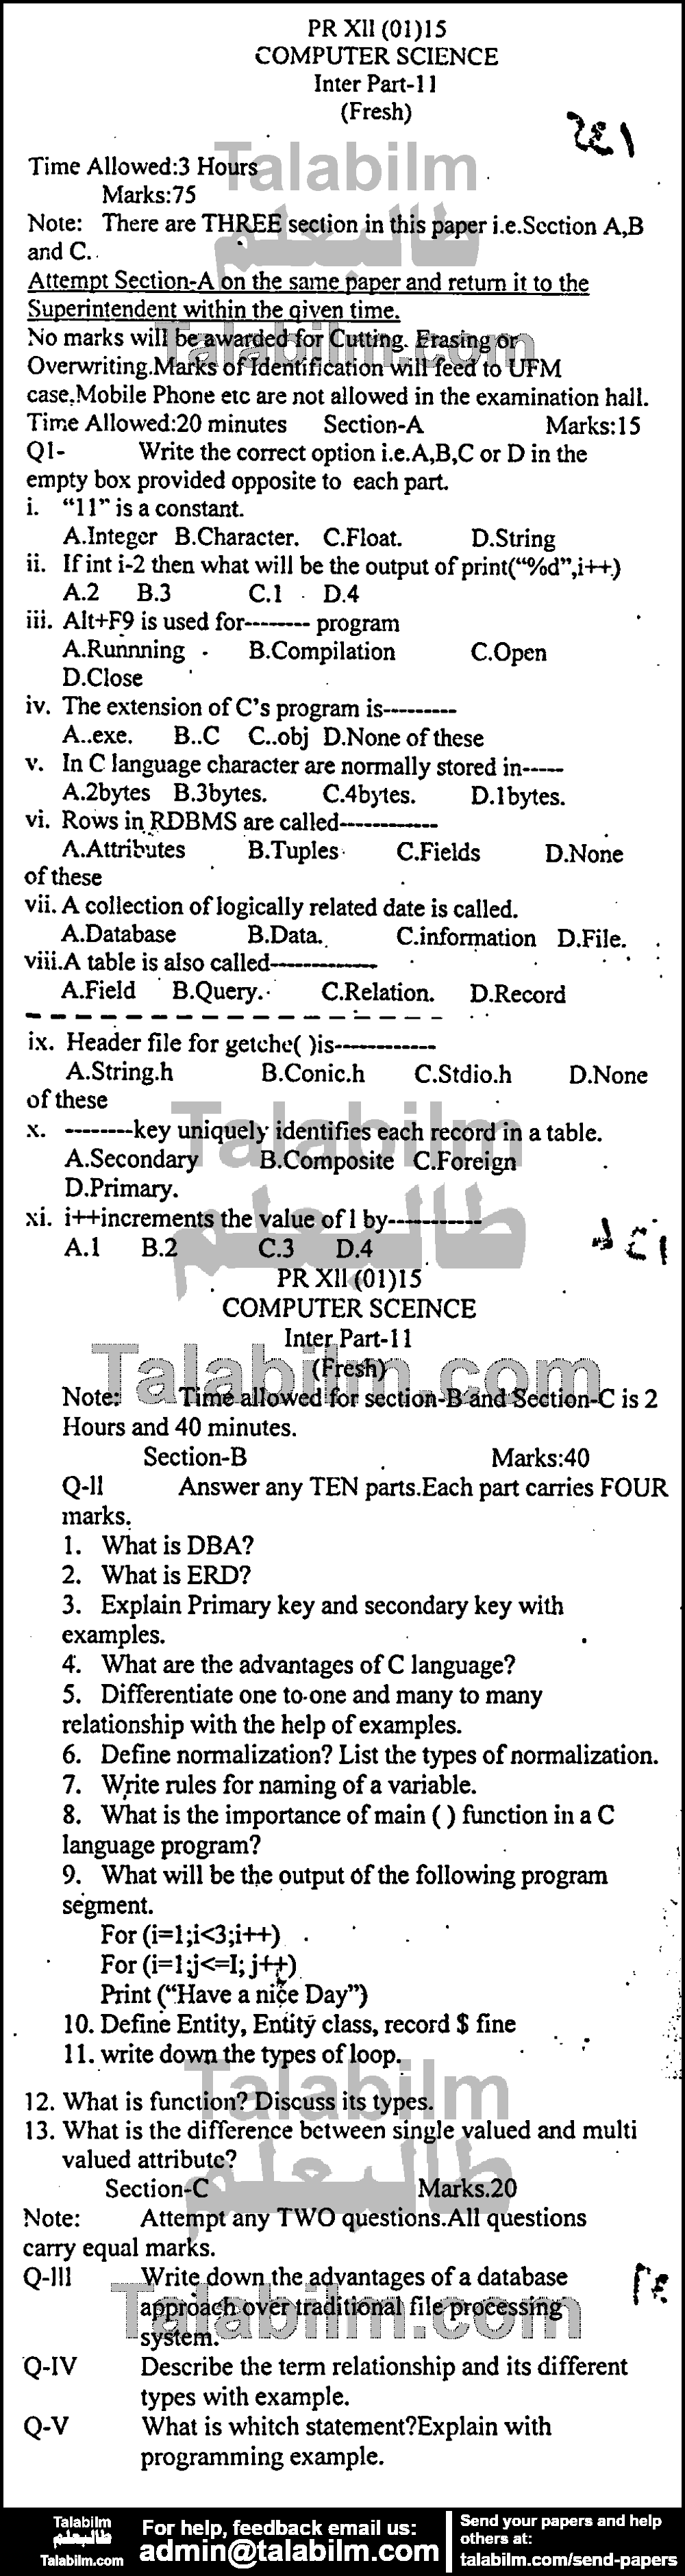 Computer Science 0 past paper for Group-I 2015